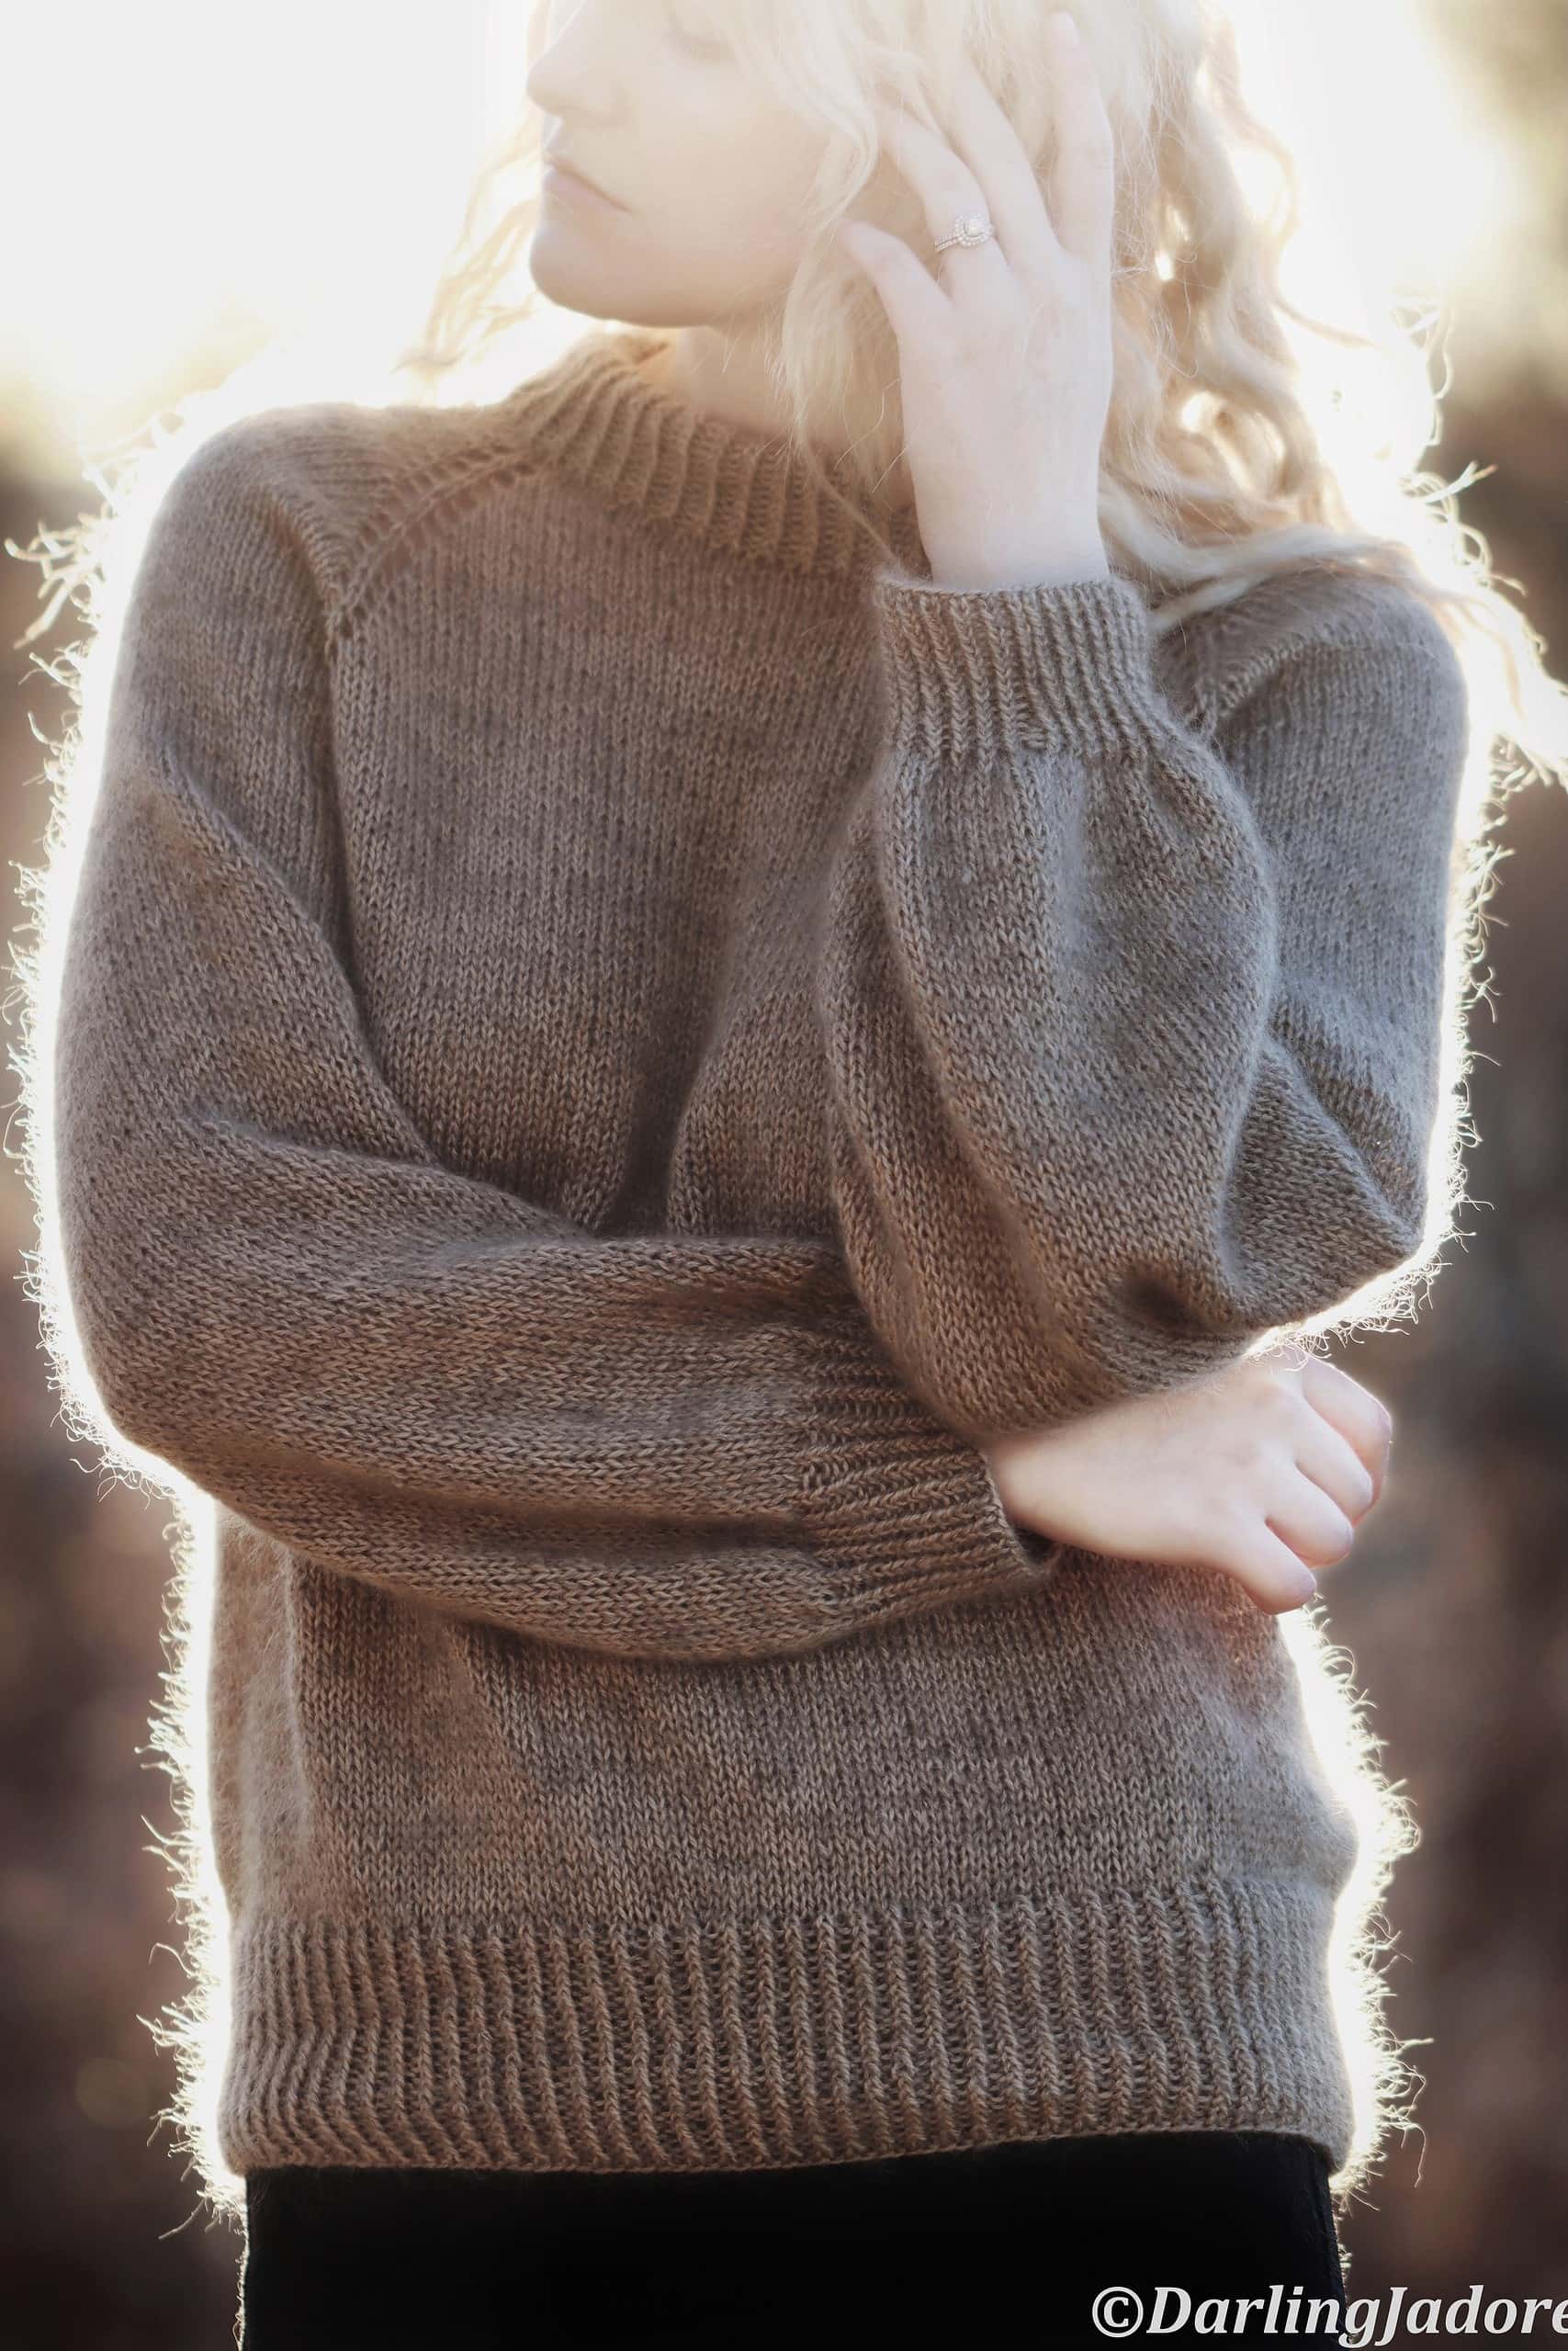 A Classic Sweater Knitting Pattern For The New Year: The Café Sweater